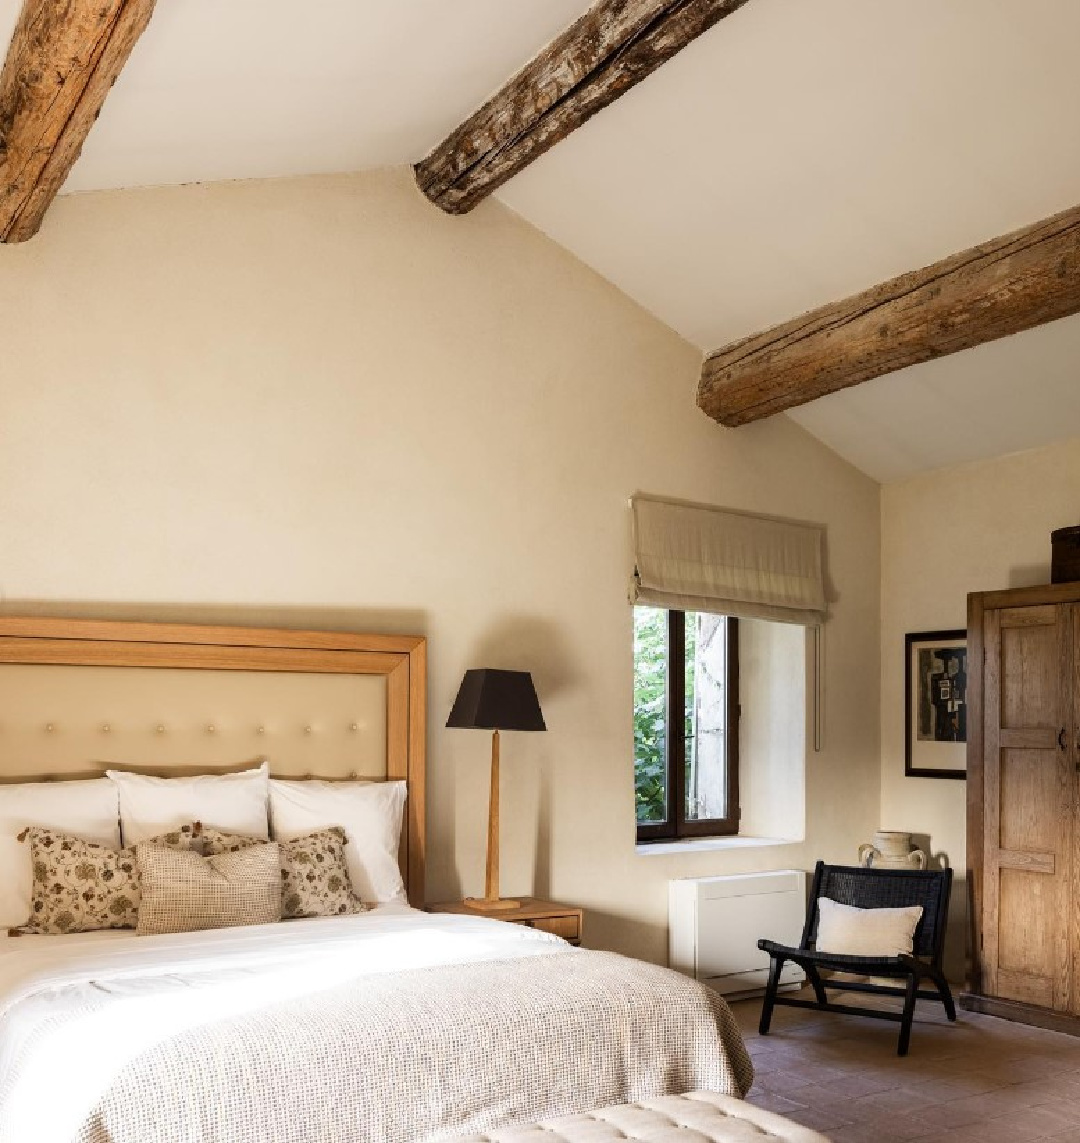 French country rustic bedroom with wood beams. Warm European luxury and cozy opulence in a French vacation villa in Provence - La Bastide de Laurence. #frenchbastide #frenchvilla #luxuryvilla #provencevilla #warmeuropeanluxury #cozyopulence #provencehomes #frenchcountryinterior